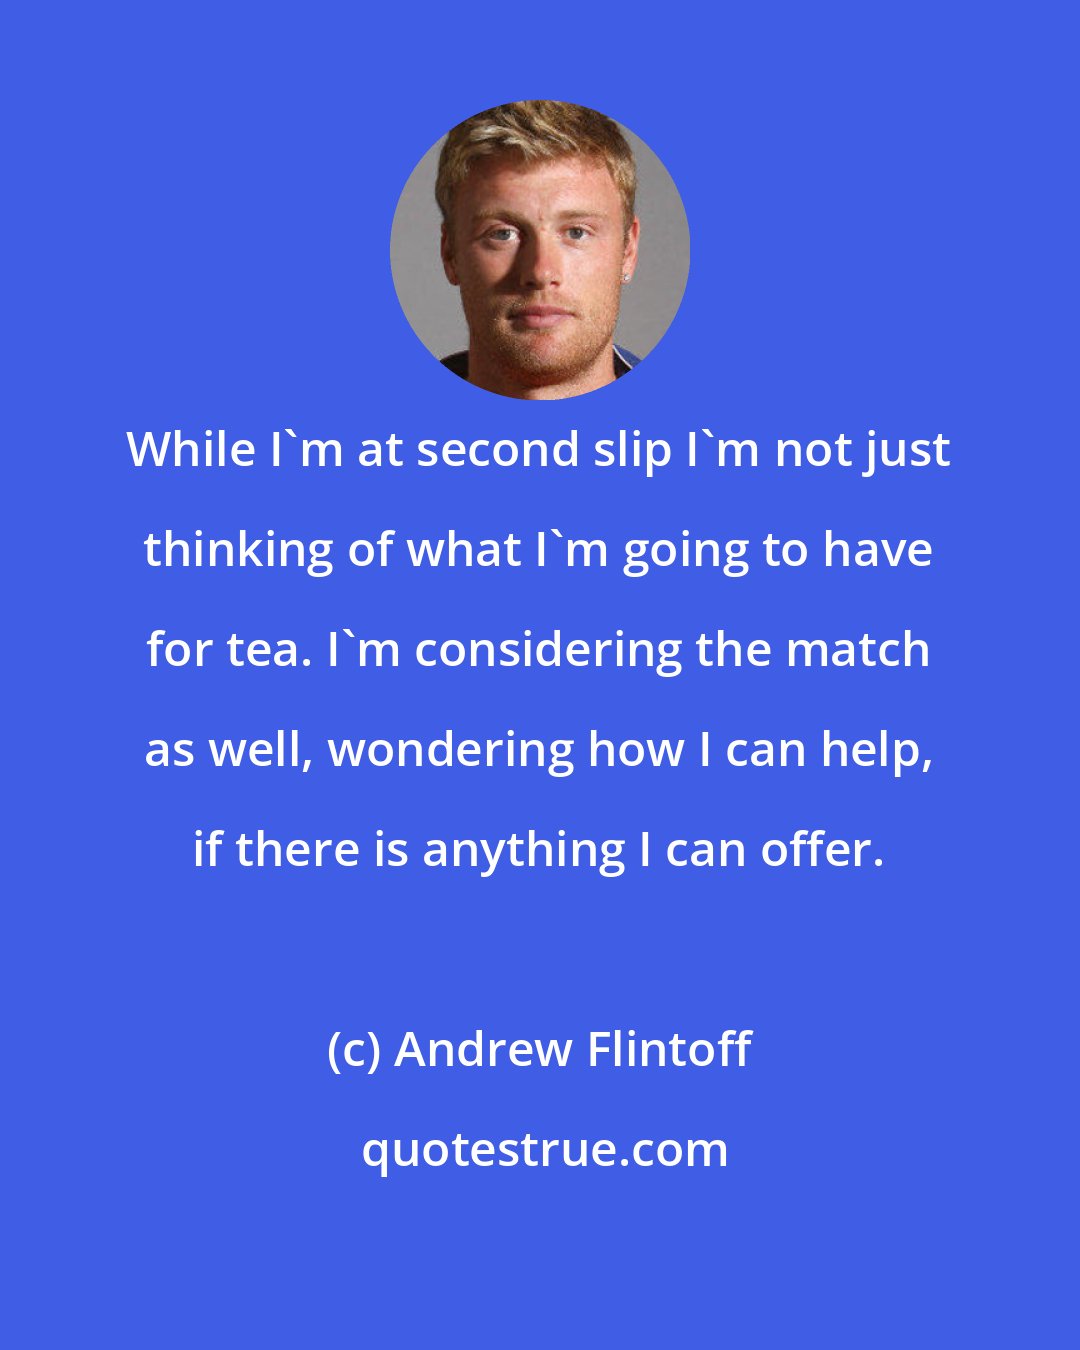 Andrew Flintoff: While I'm at second slip I'm not just thinking of what I'm going to have for tea. I'm considering the match as well, wondering how I can help, if there is anything I can offer.